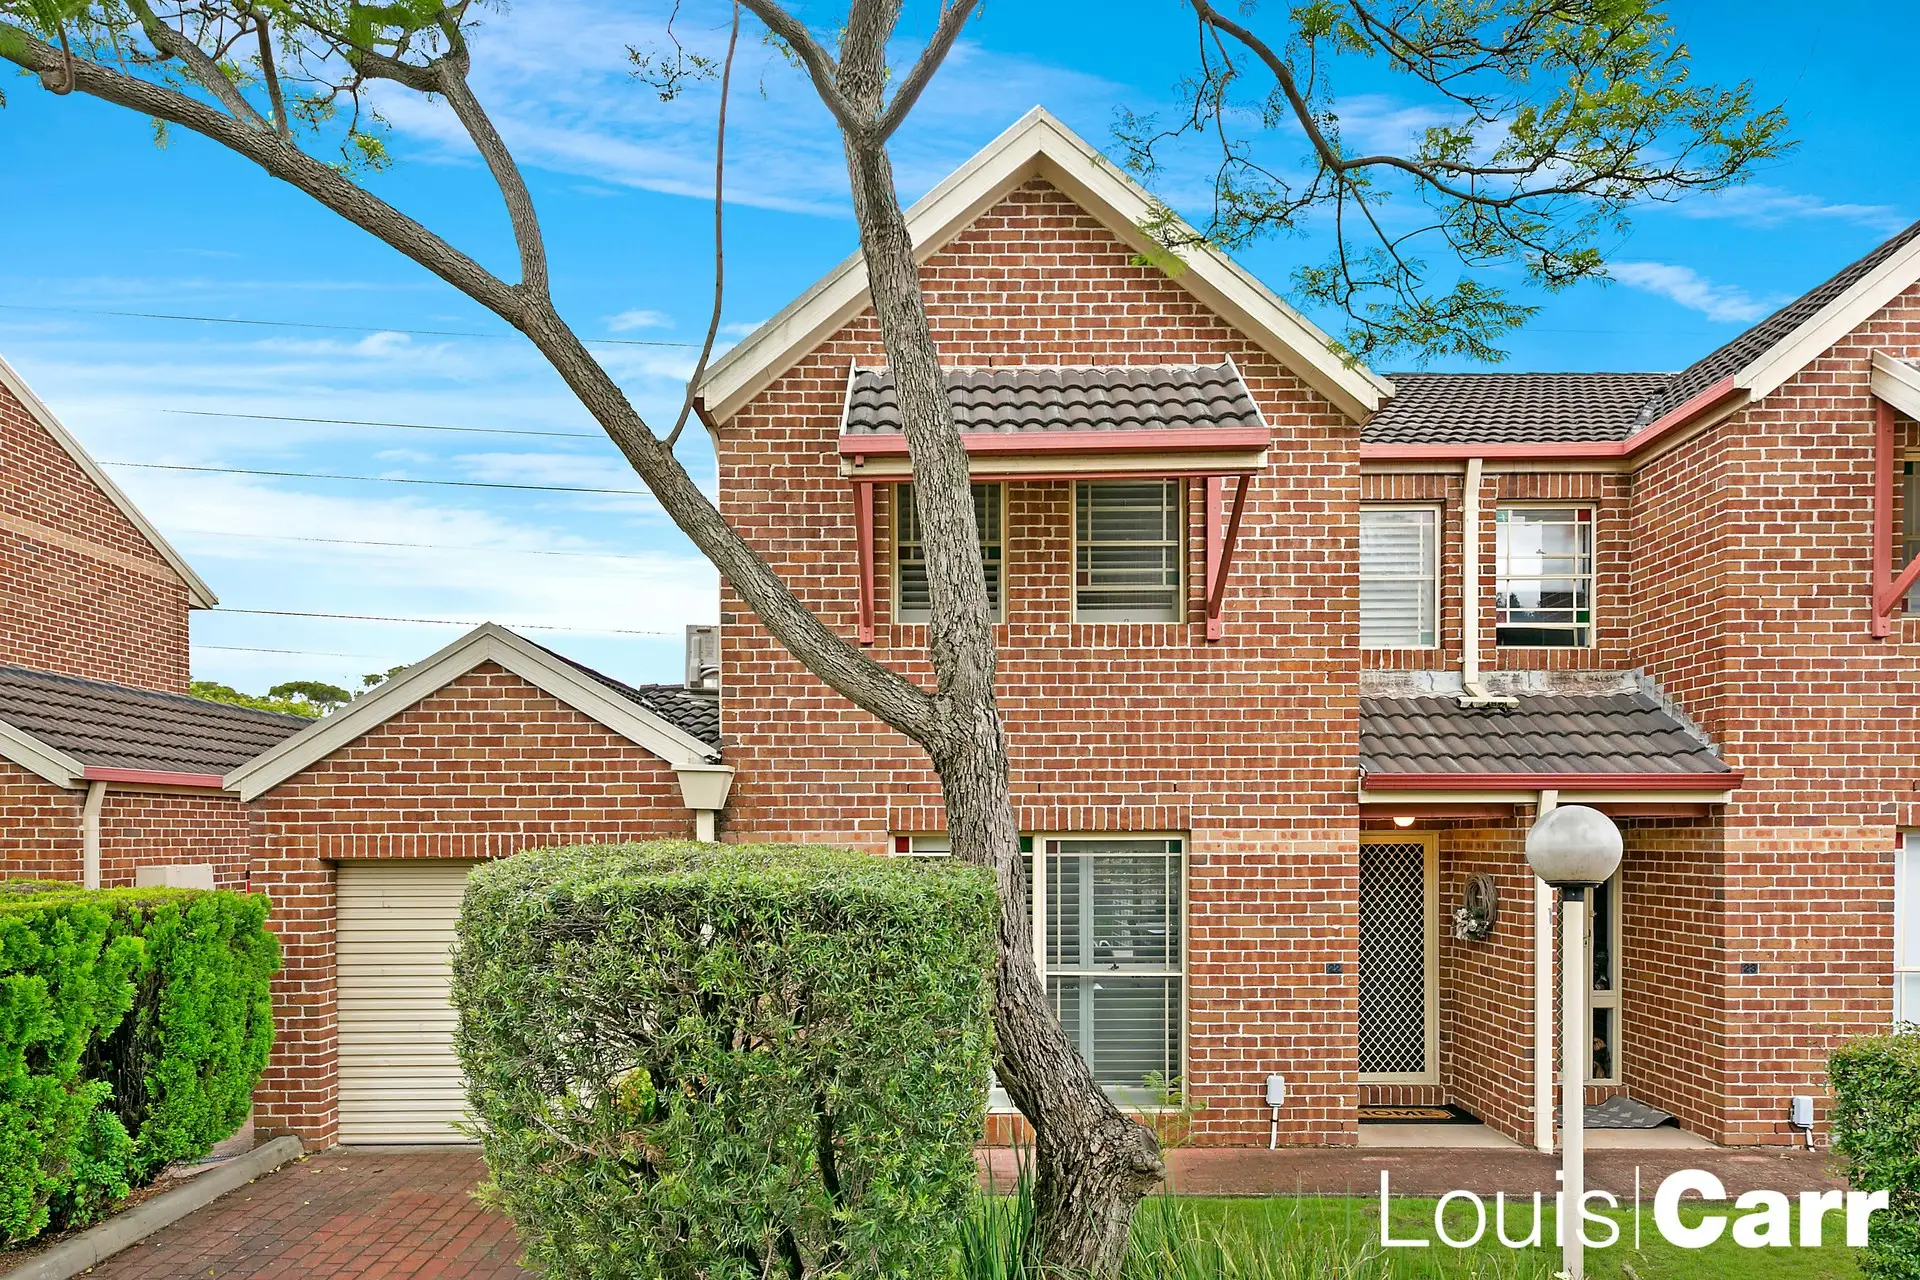 Photo #1: 22/10 View Street, West Pennant Hills - Sold by Louis Carr Real Estate